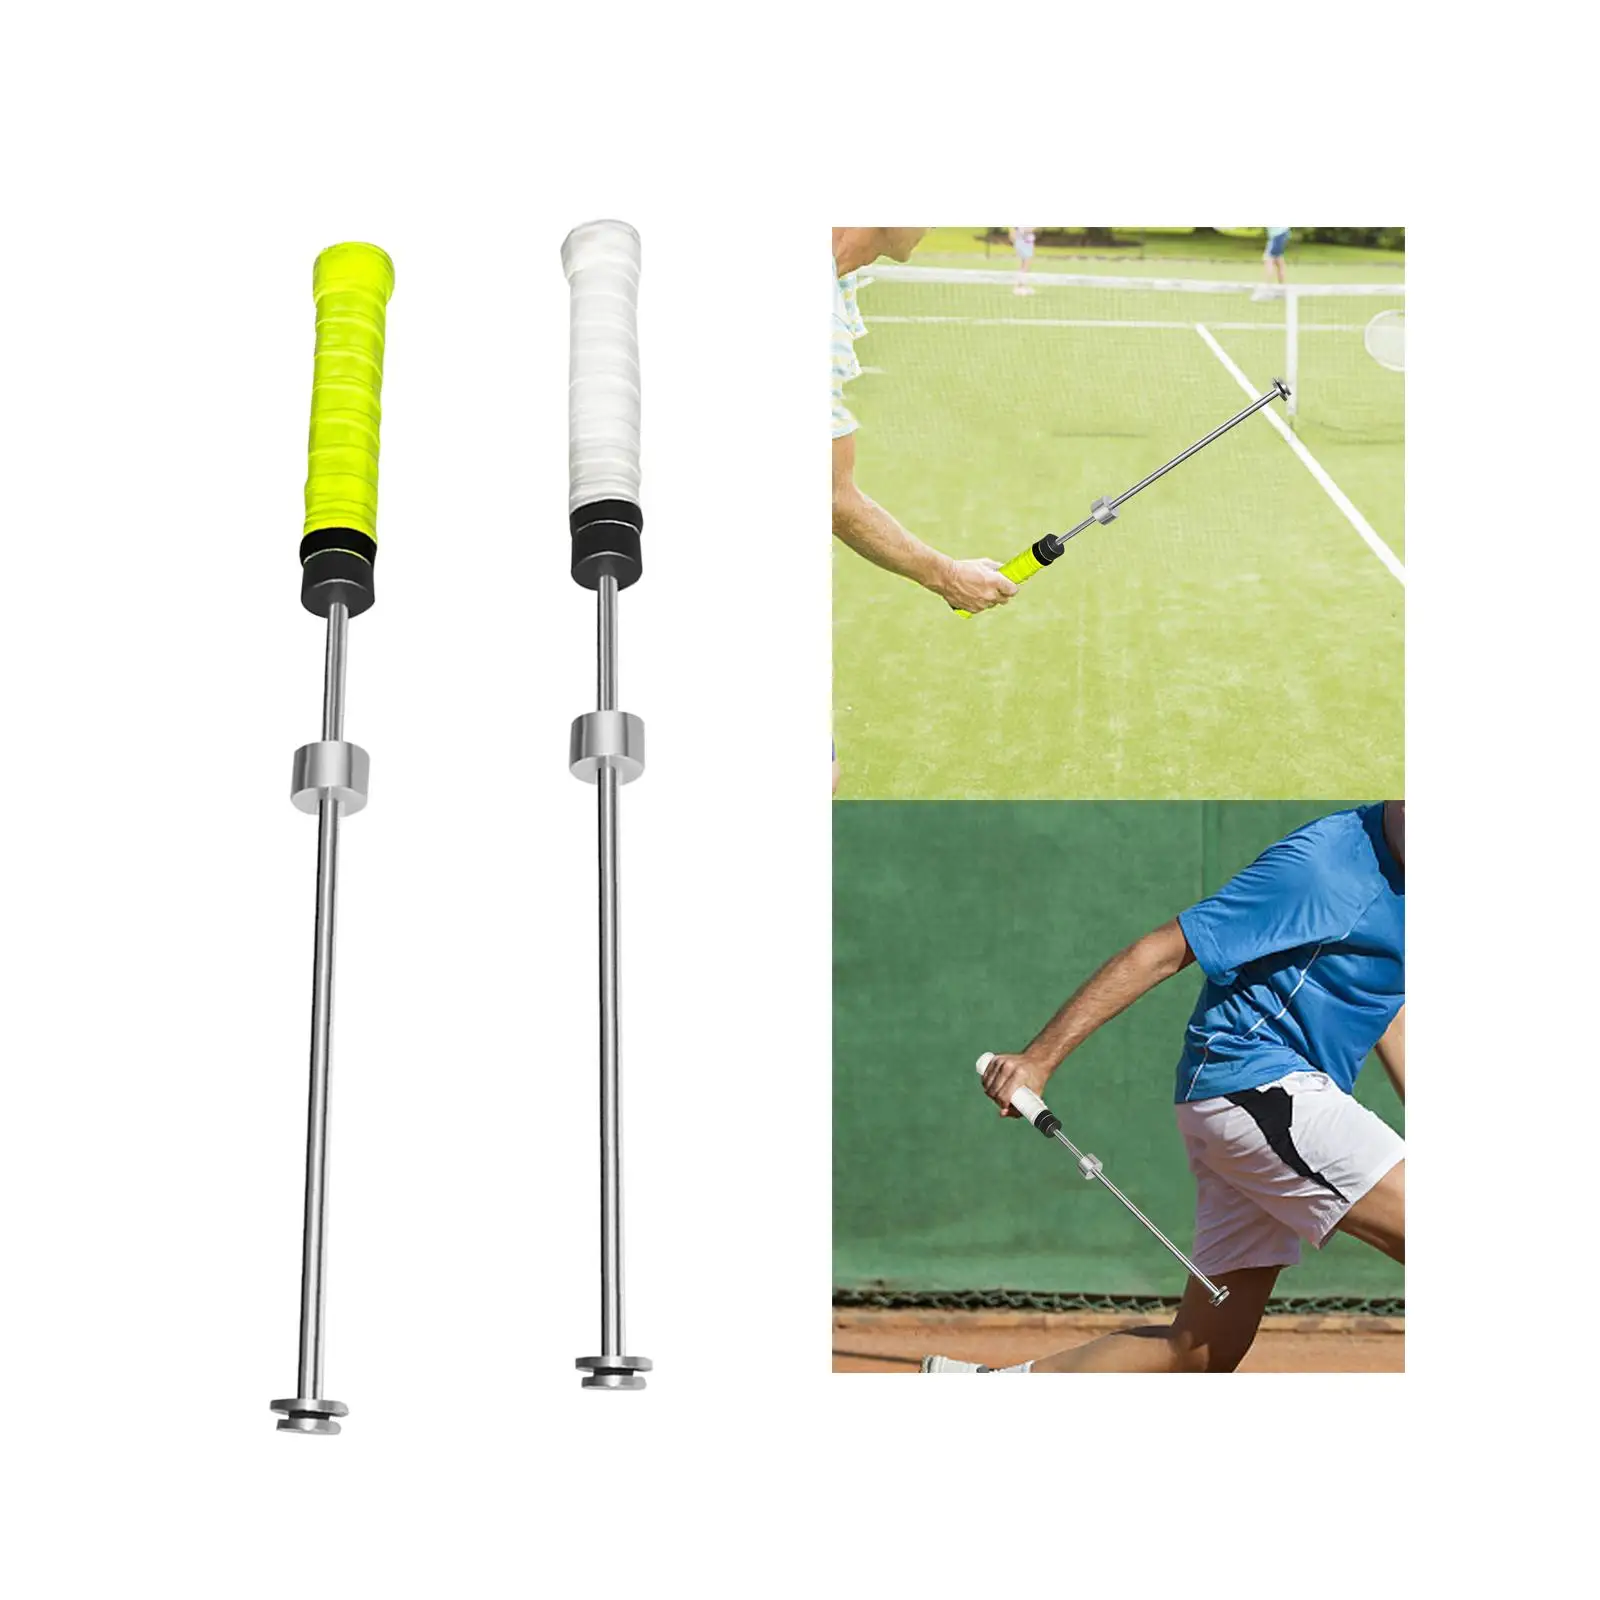 Sound Remind Exercise Sports Tool Tennis Swing Training Portable Tennis Swing Trainer Aid